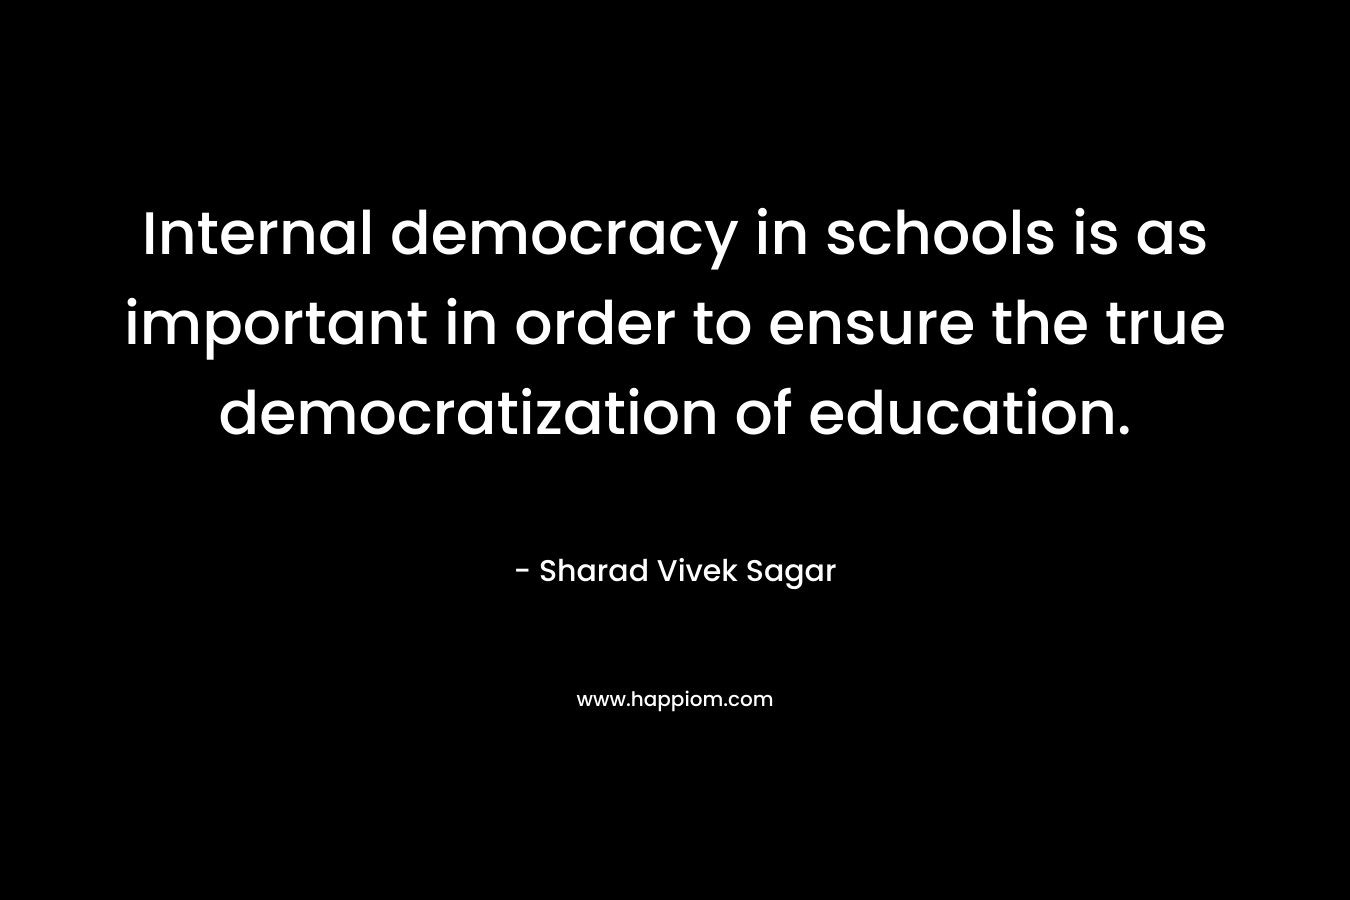 Internal democracy in schools is as important in order to ensure the true democratization of education.